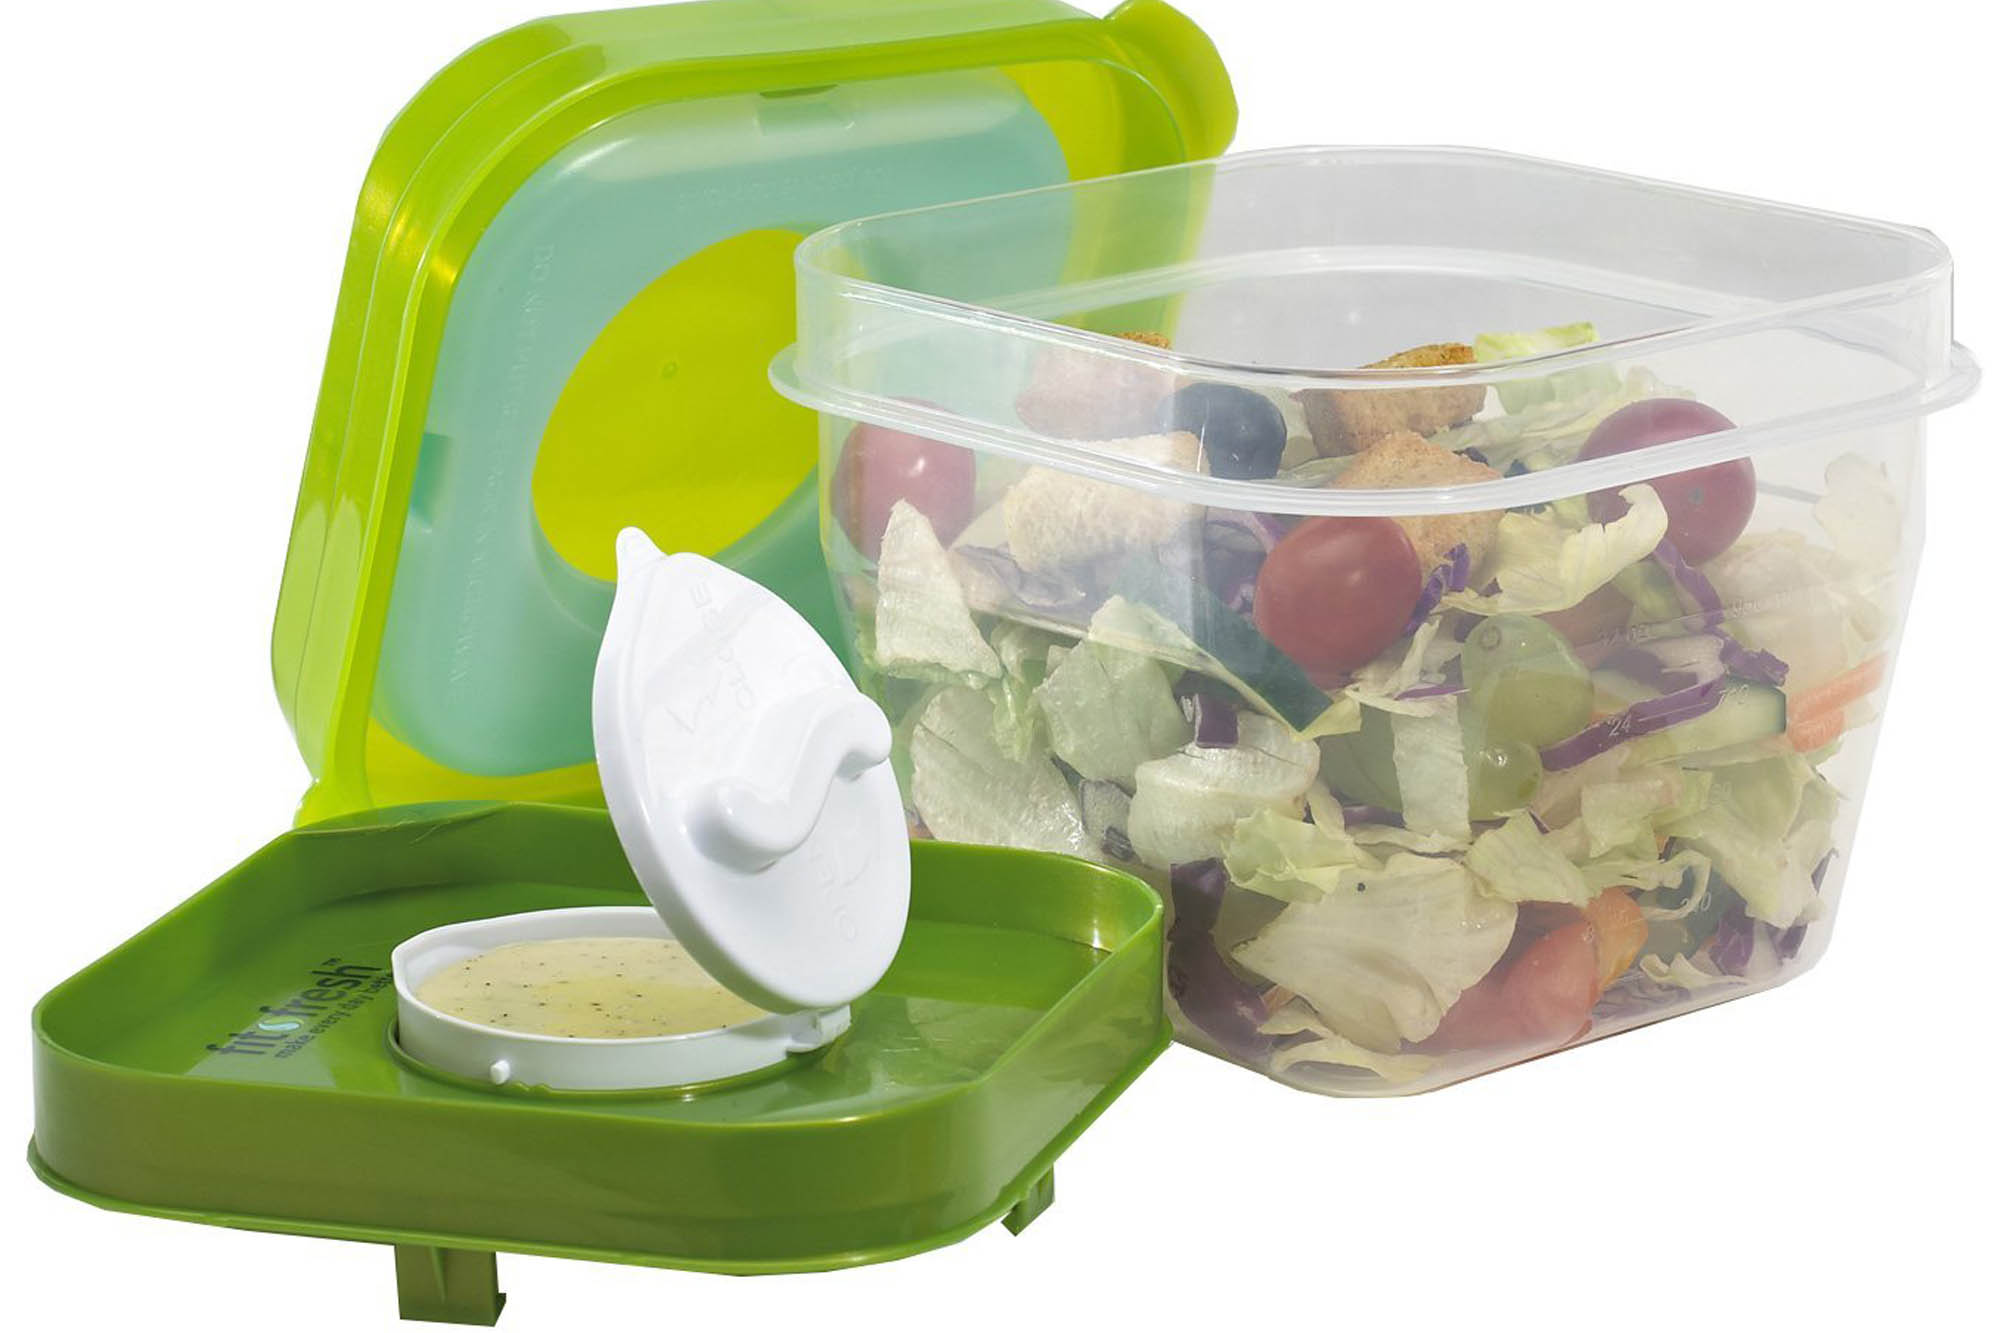 Salad container